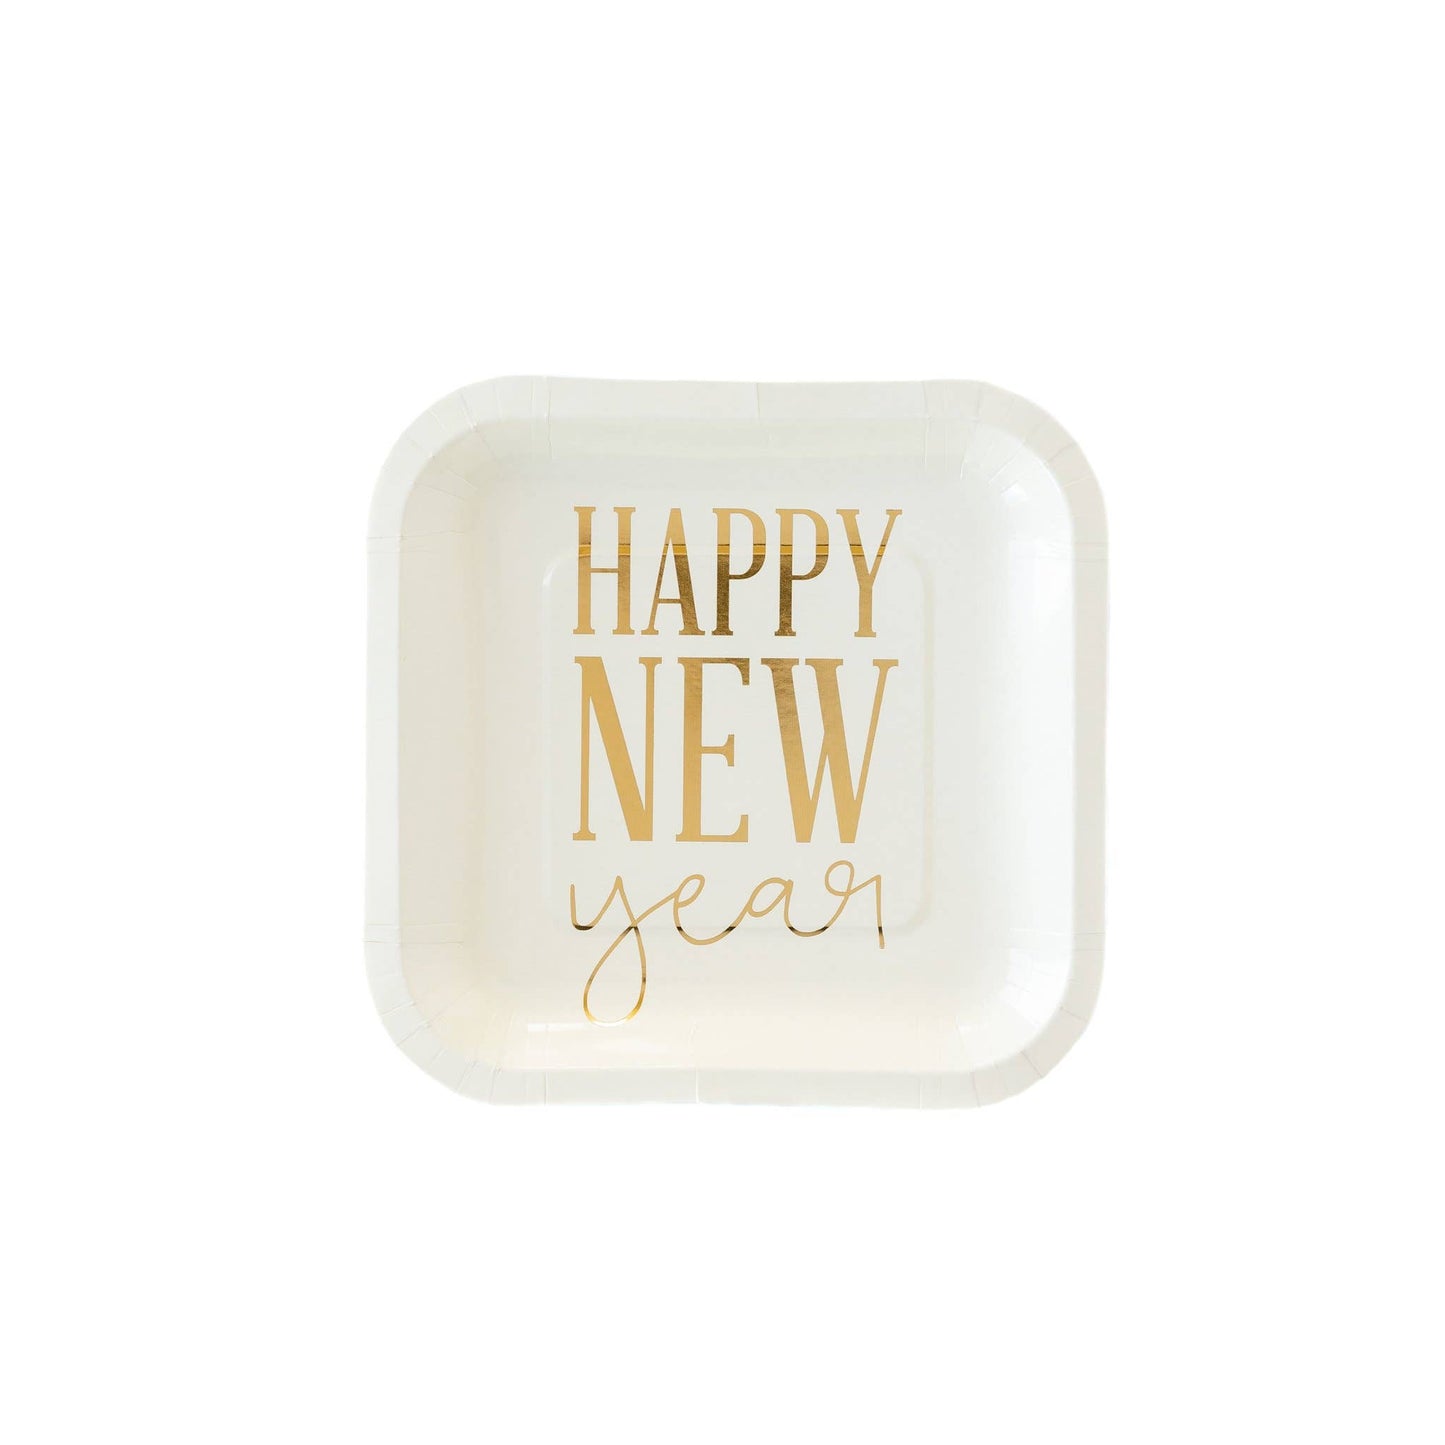 Happy New Year Square Plate